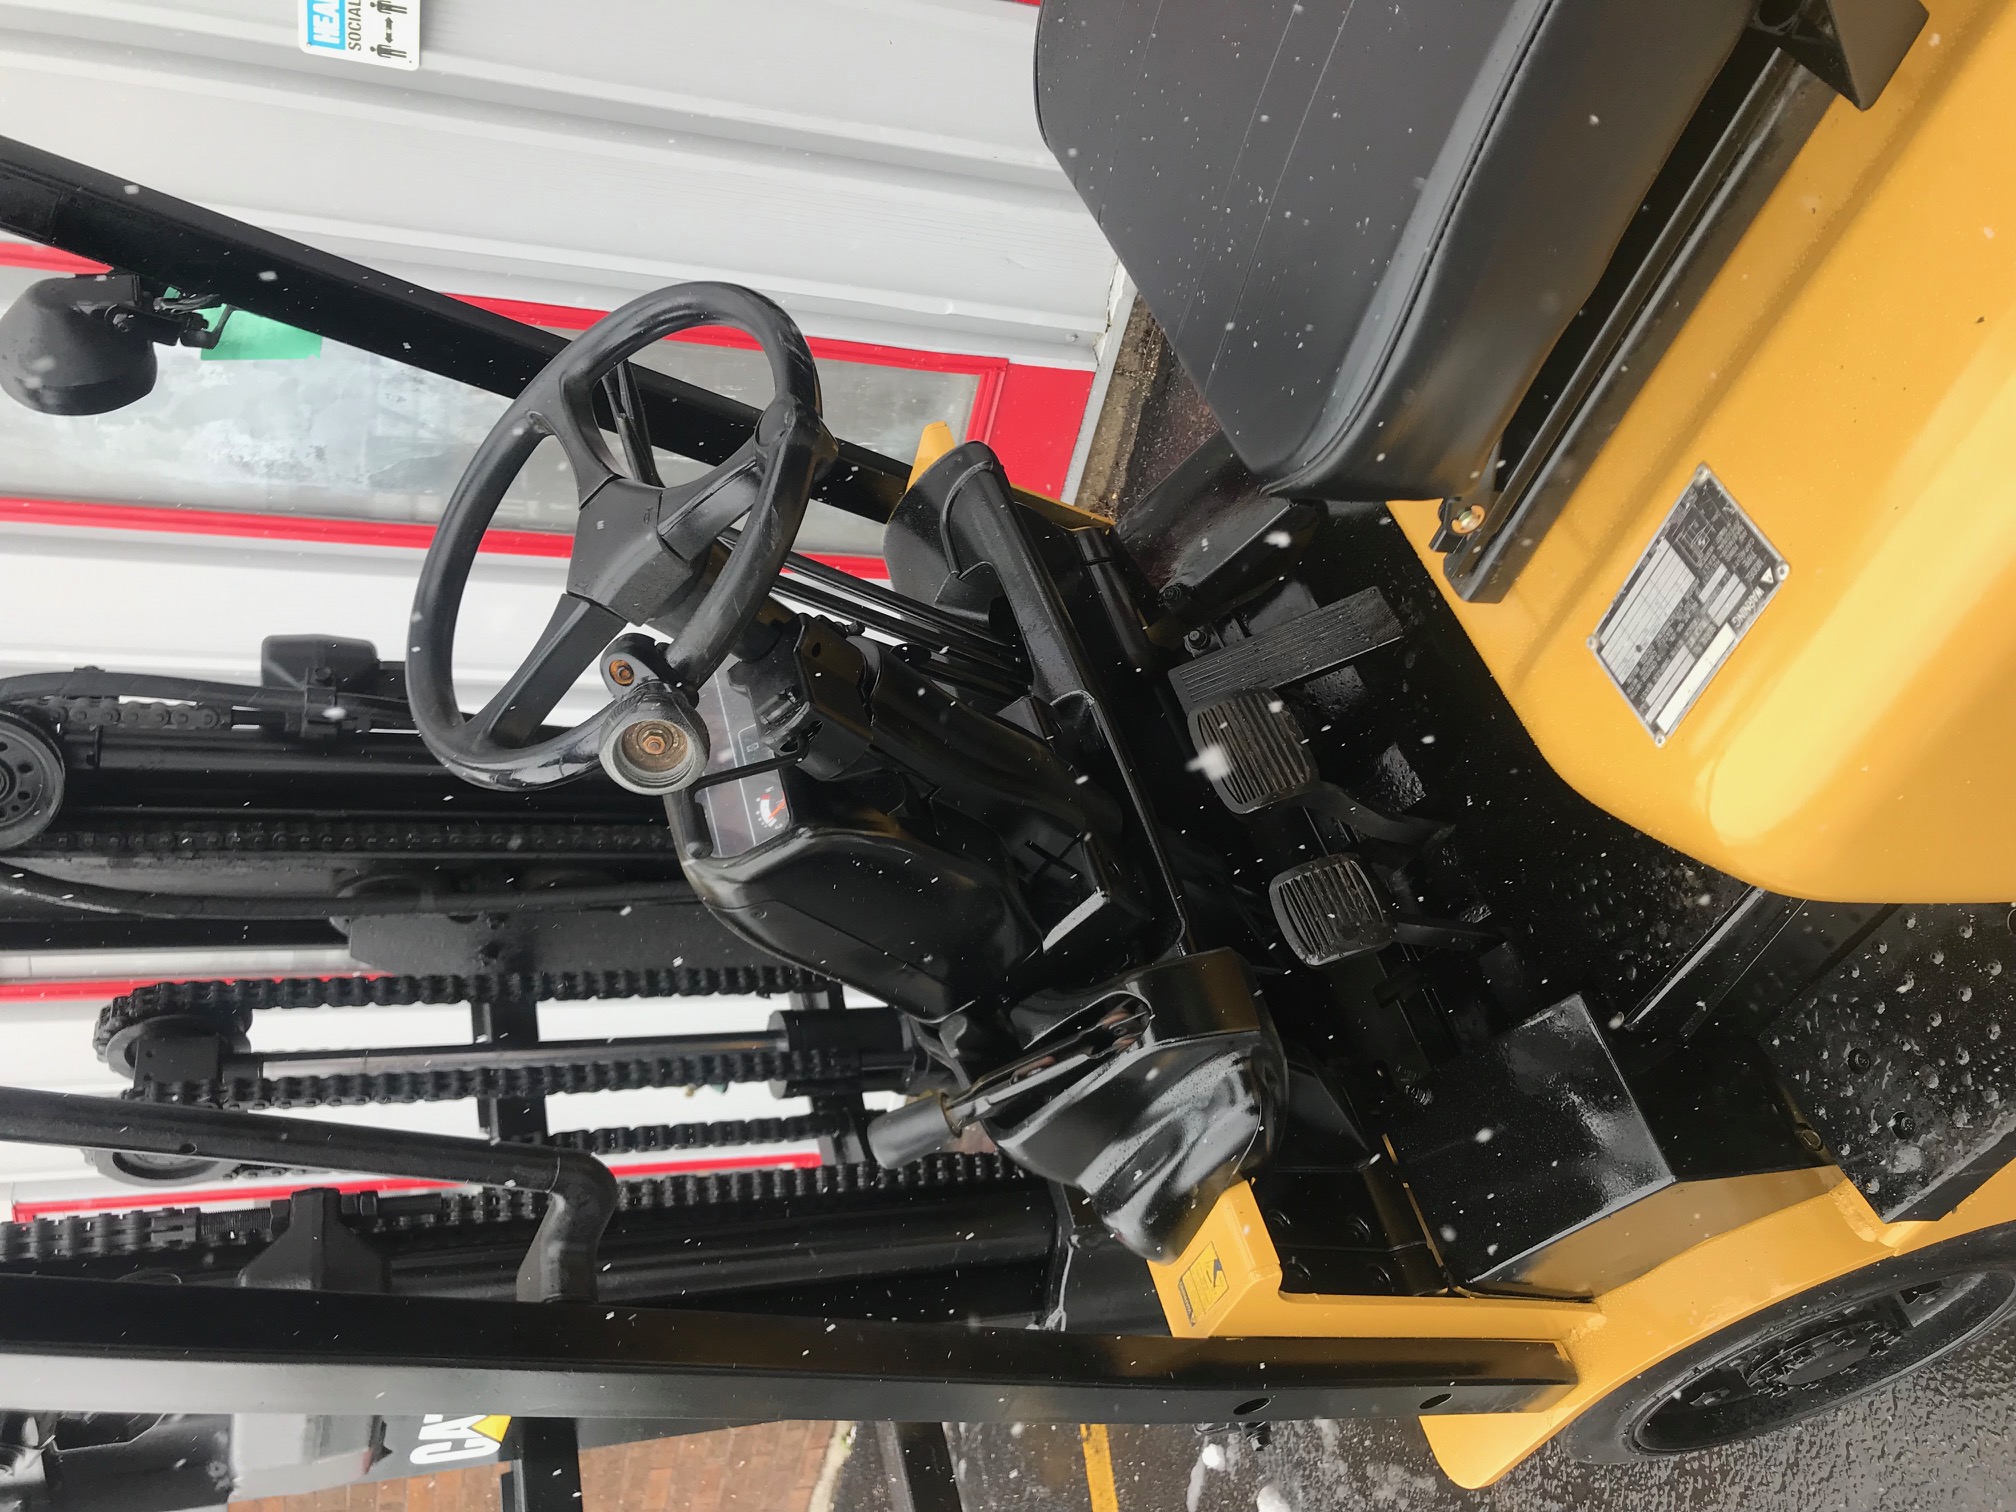 Yellow caterpillar forklift with side shifter for sale